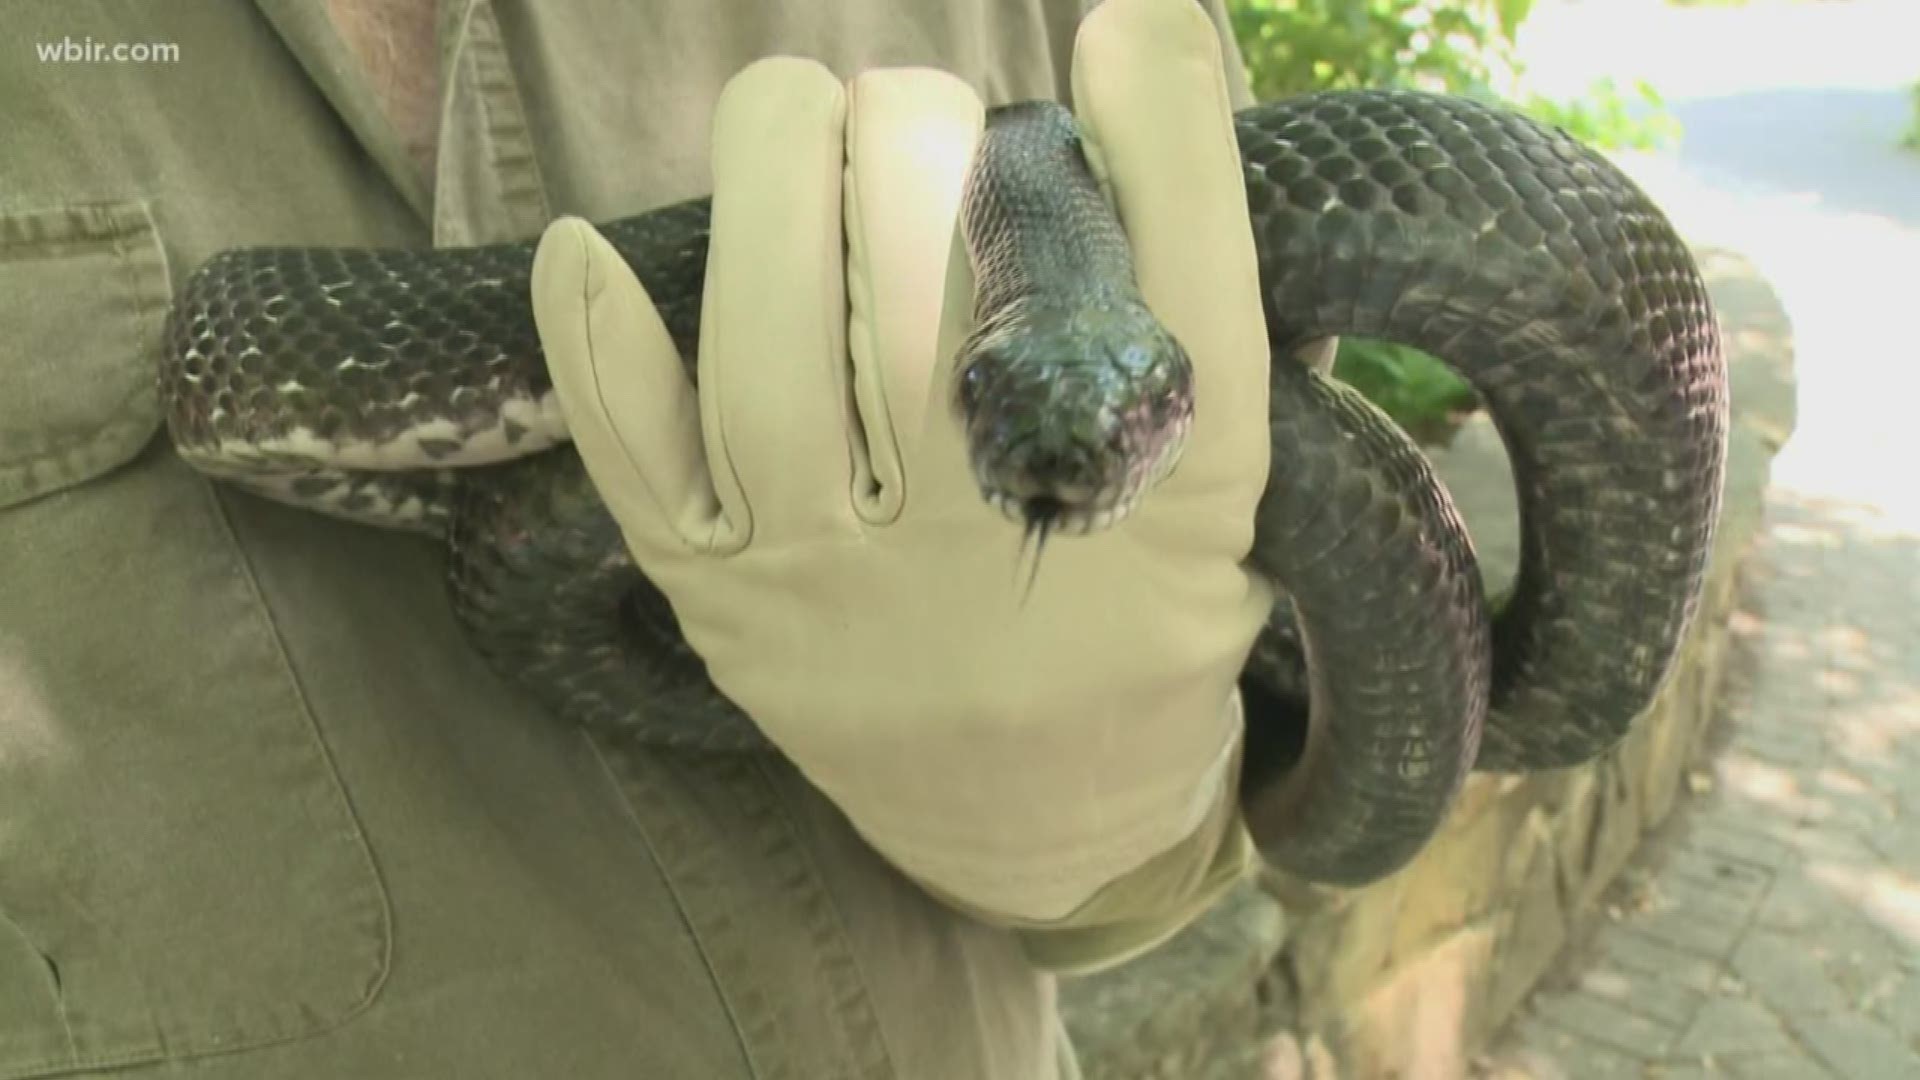 There are 19 species of snakes that call East Tennessee home. Two of those are venomous.